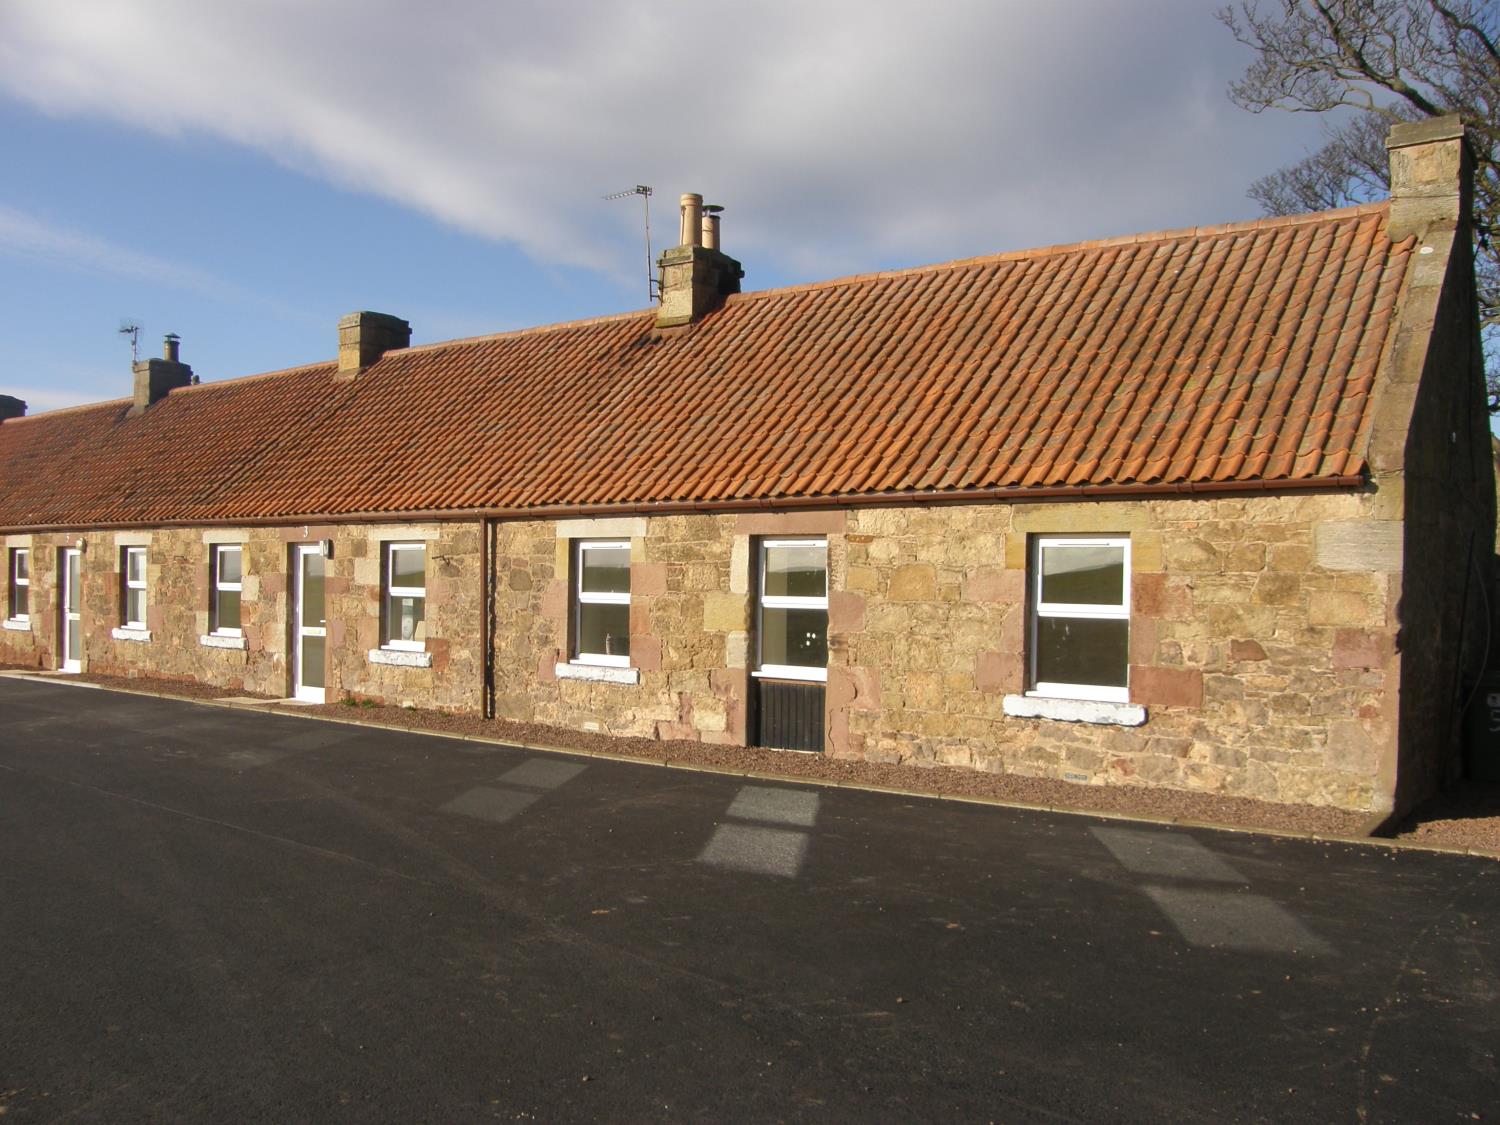 View property for rent Newhouse Farm Cottages, North Berwick